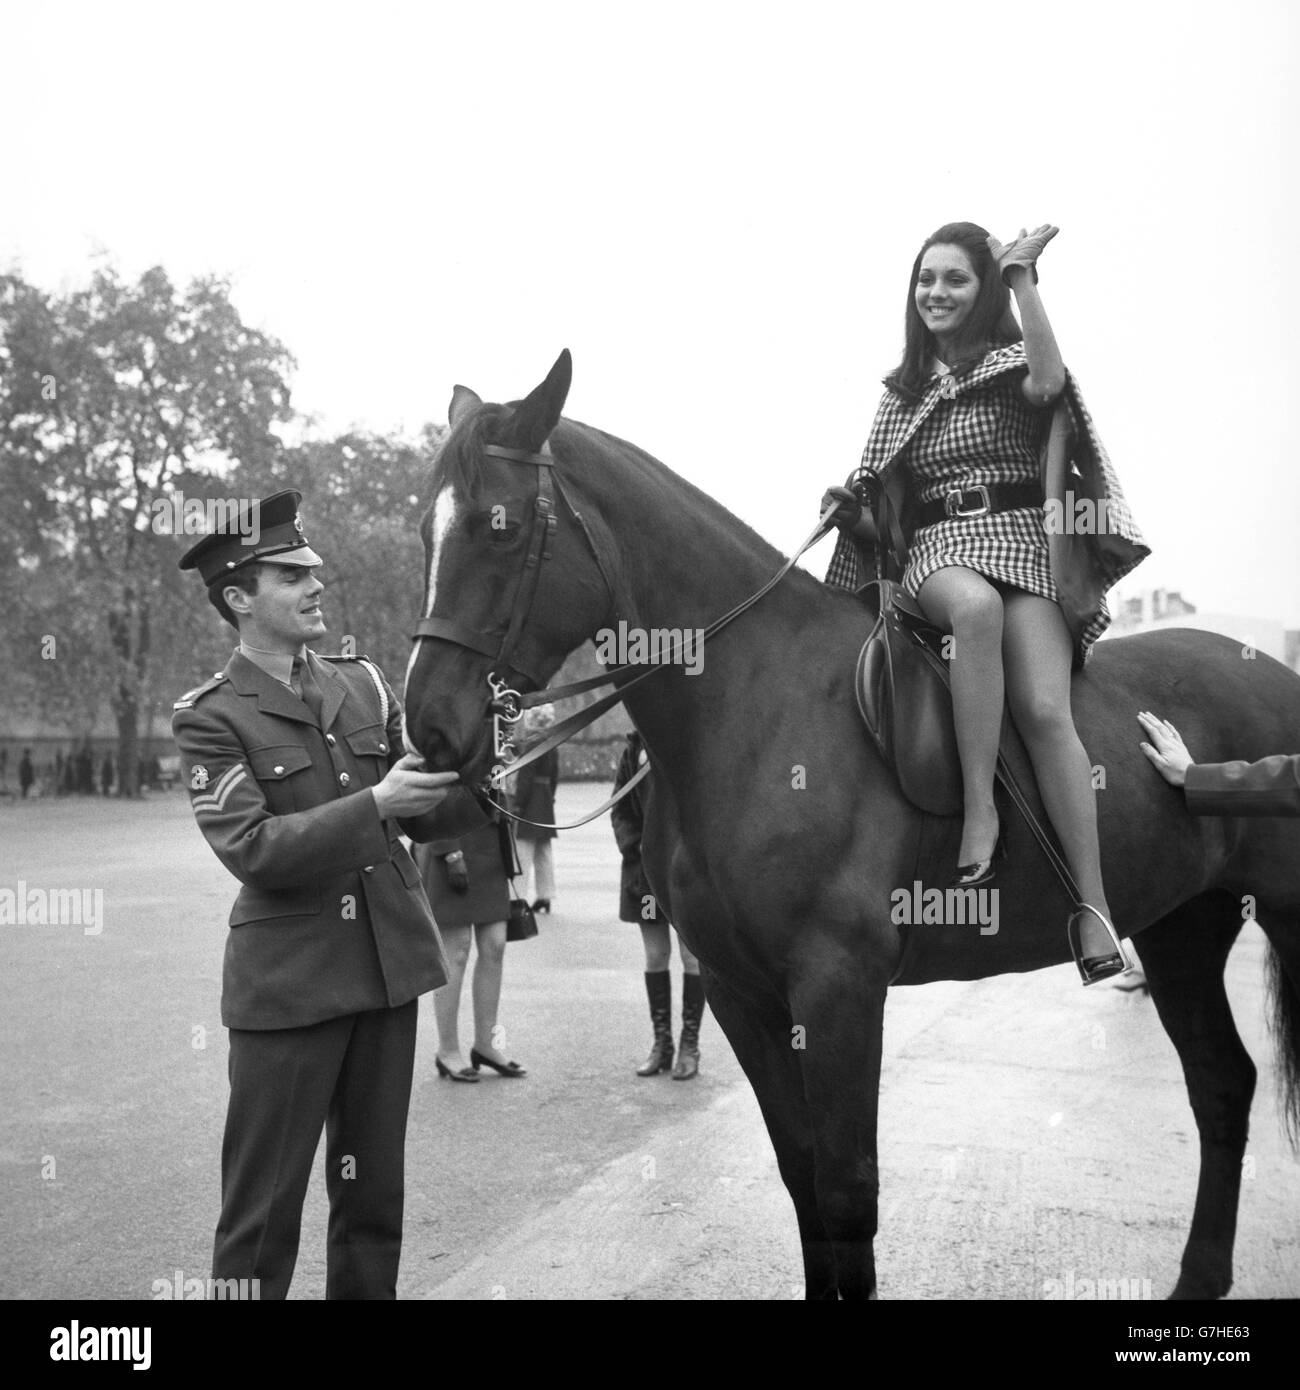 Miss Venezuela Marcia Rita Piazza poses on a Household Cavalry mount at Wellington Barracks. Finalists in the Miss World competition were taking part in a sightseeing tour of London. Stock Photo